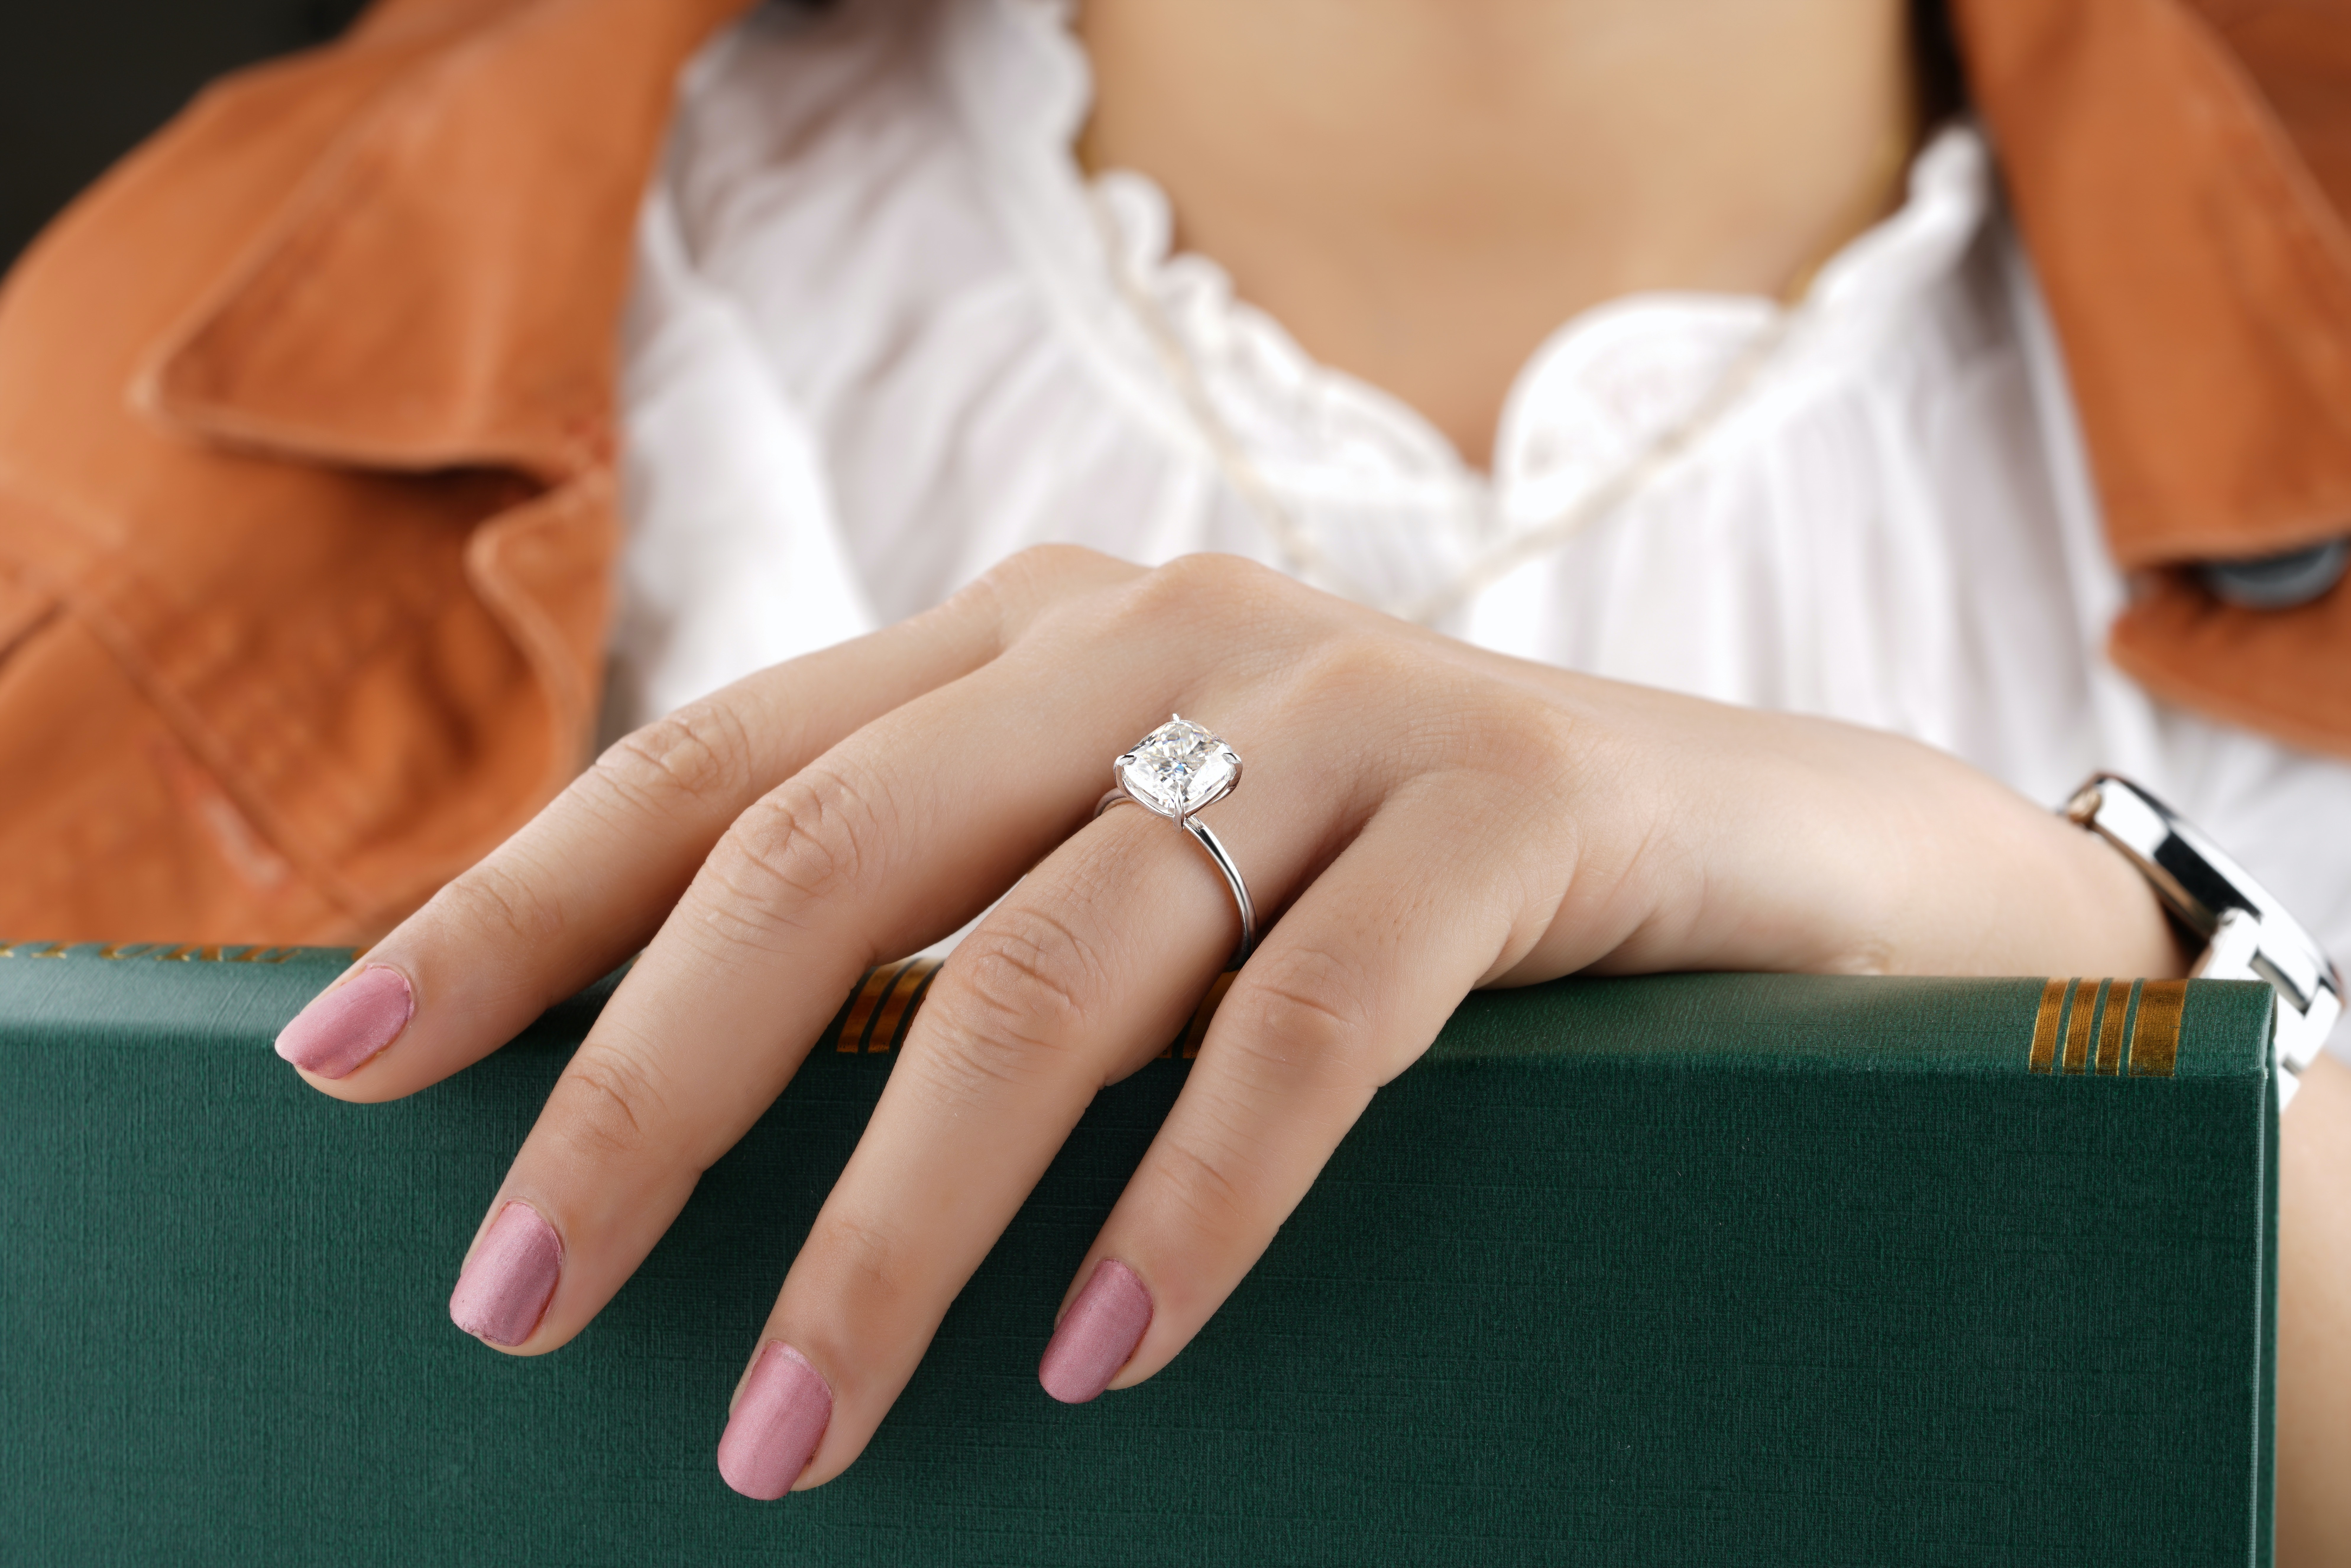 What to Look for When Buying a Diamond Engagement Ring